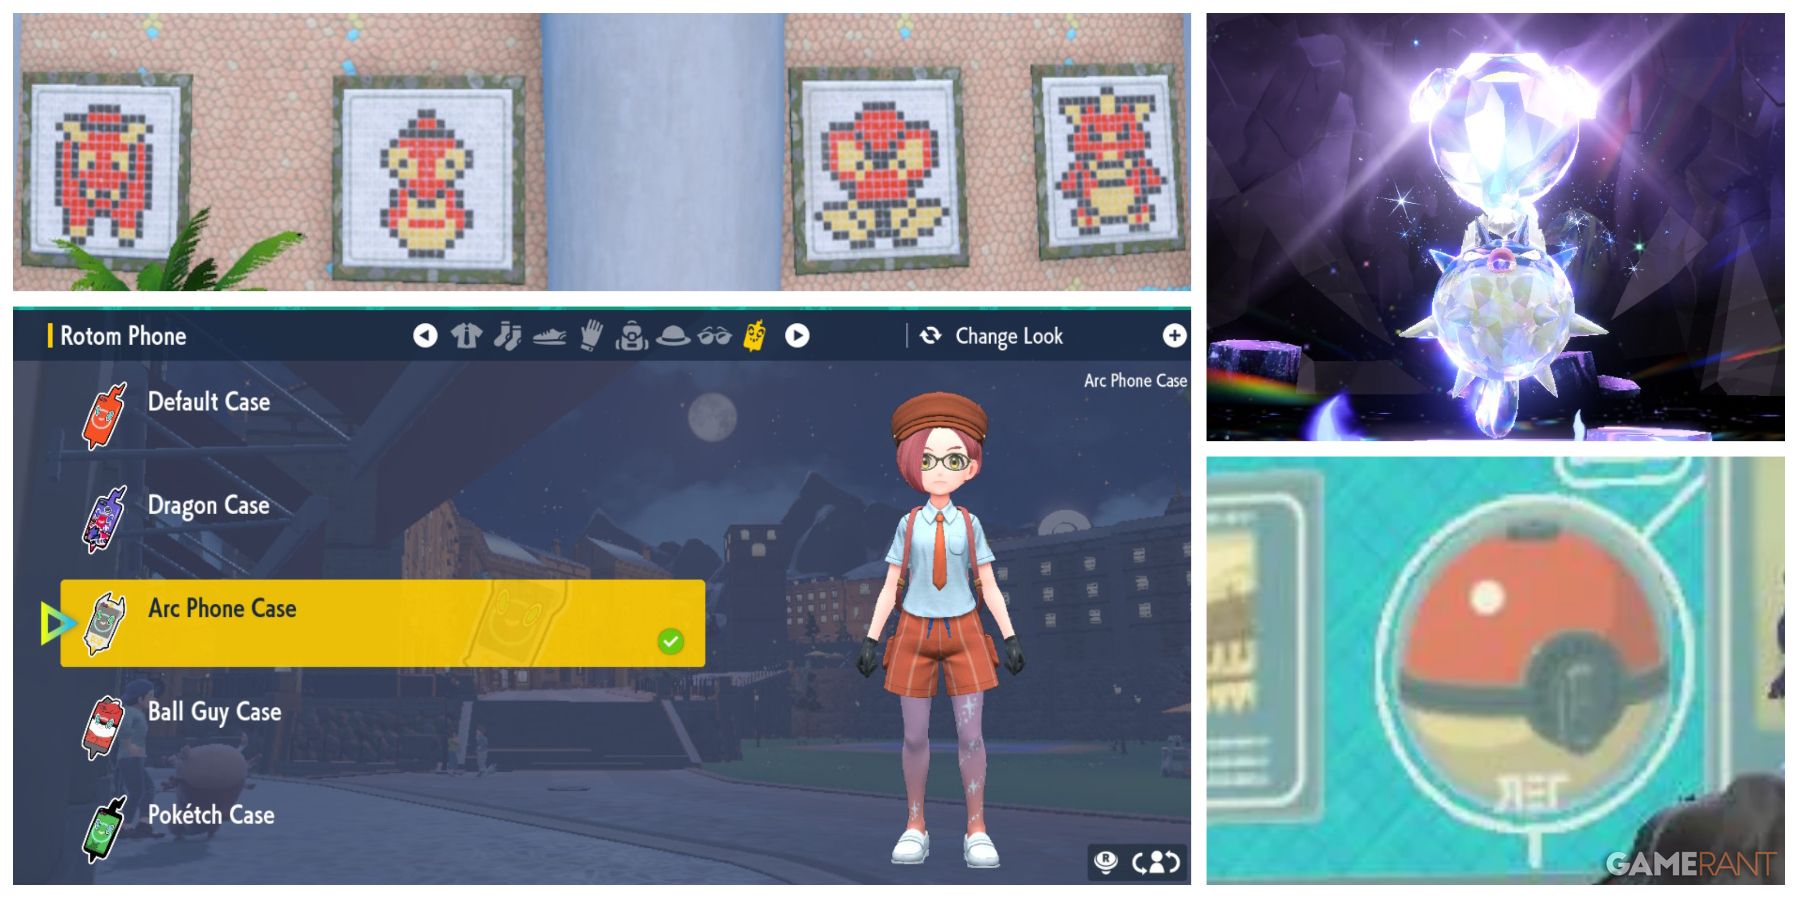 How to change Rotom phone cases and unlock save bonus cases in Pokémon  Scarlet and Violet